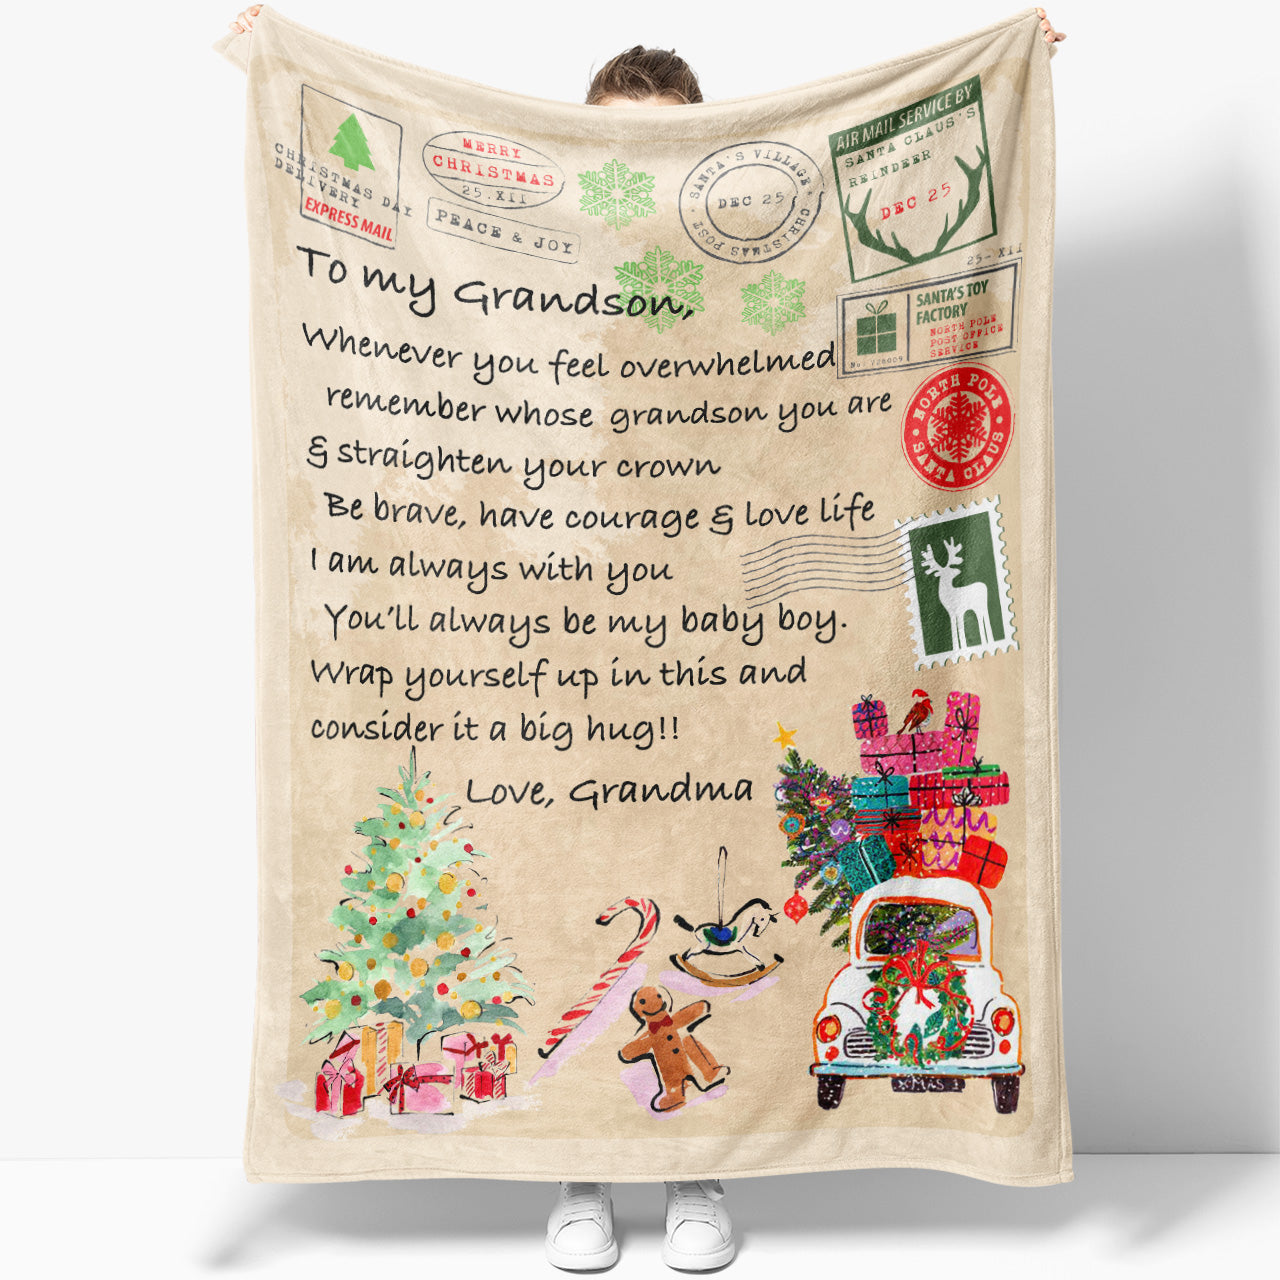 Grandson Photo Pillow Personalized, Grandson Christmas Gifts From Grandma,  Inside This Pillow Is A Peace Of My Heart Grandson Gifts - Best Personalized  Gifts For Everyone